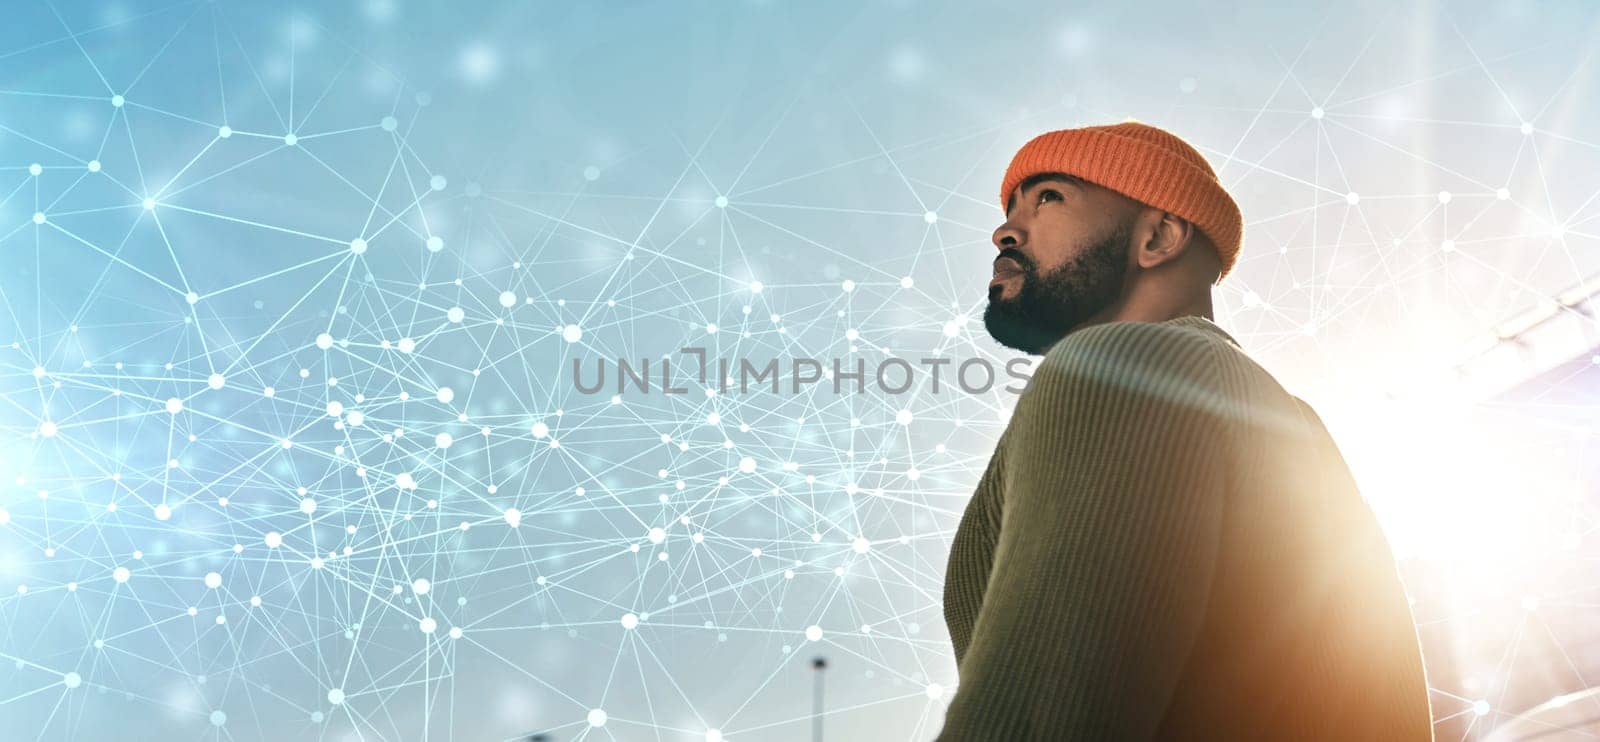 City, hologram and man with banner, thinking and travel with student, lens flare and casual outfit. Person, planning or guy on a road, outdoor and bokeh with solution, futuristic or vision with ideas.